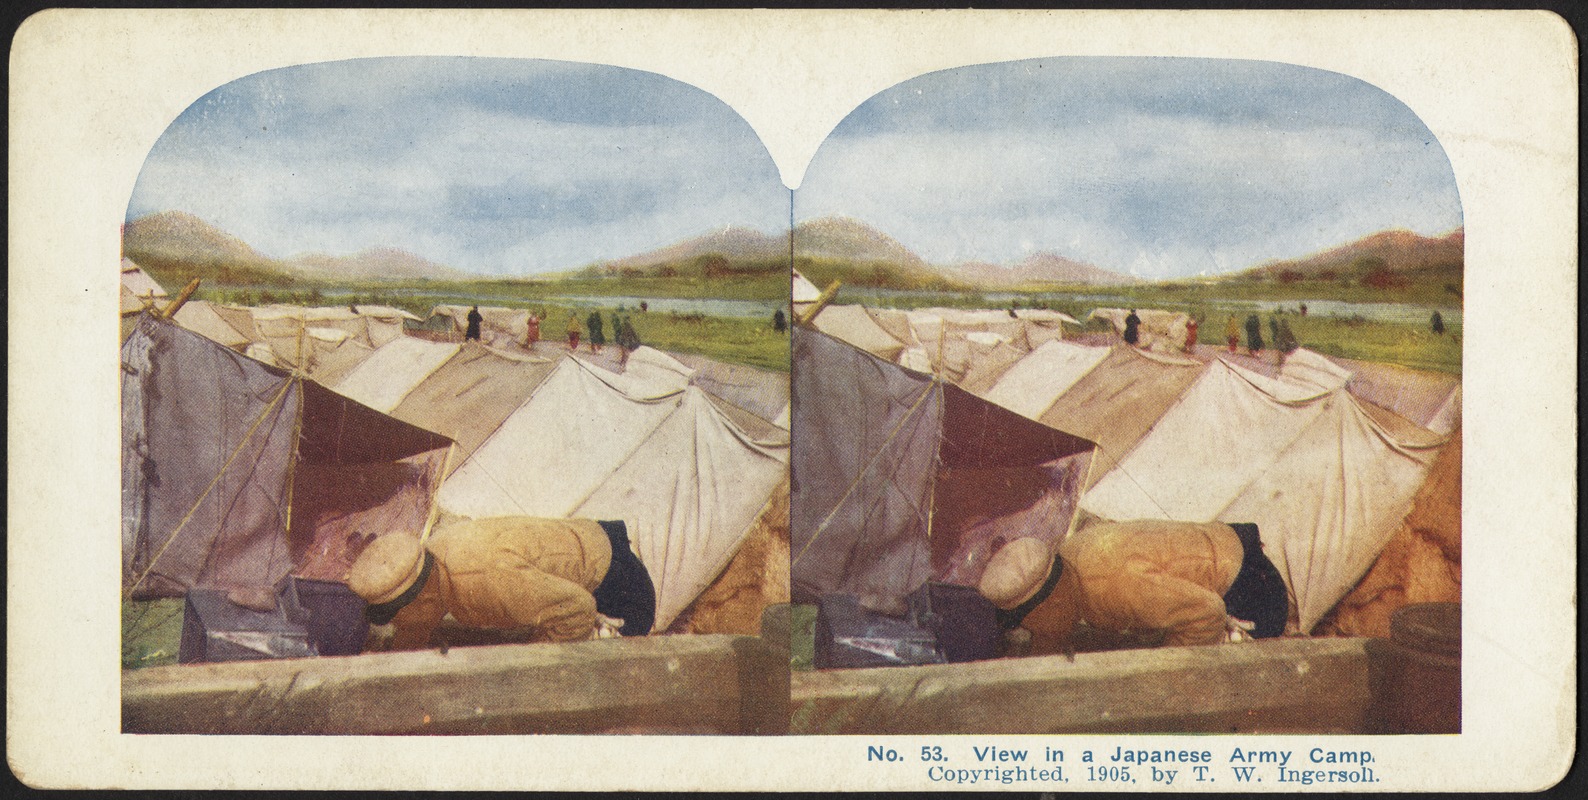 View in a Japanese army camp